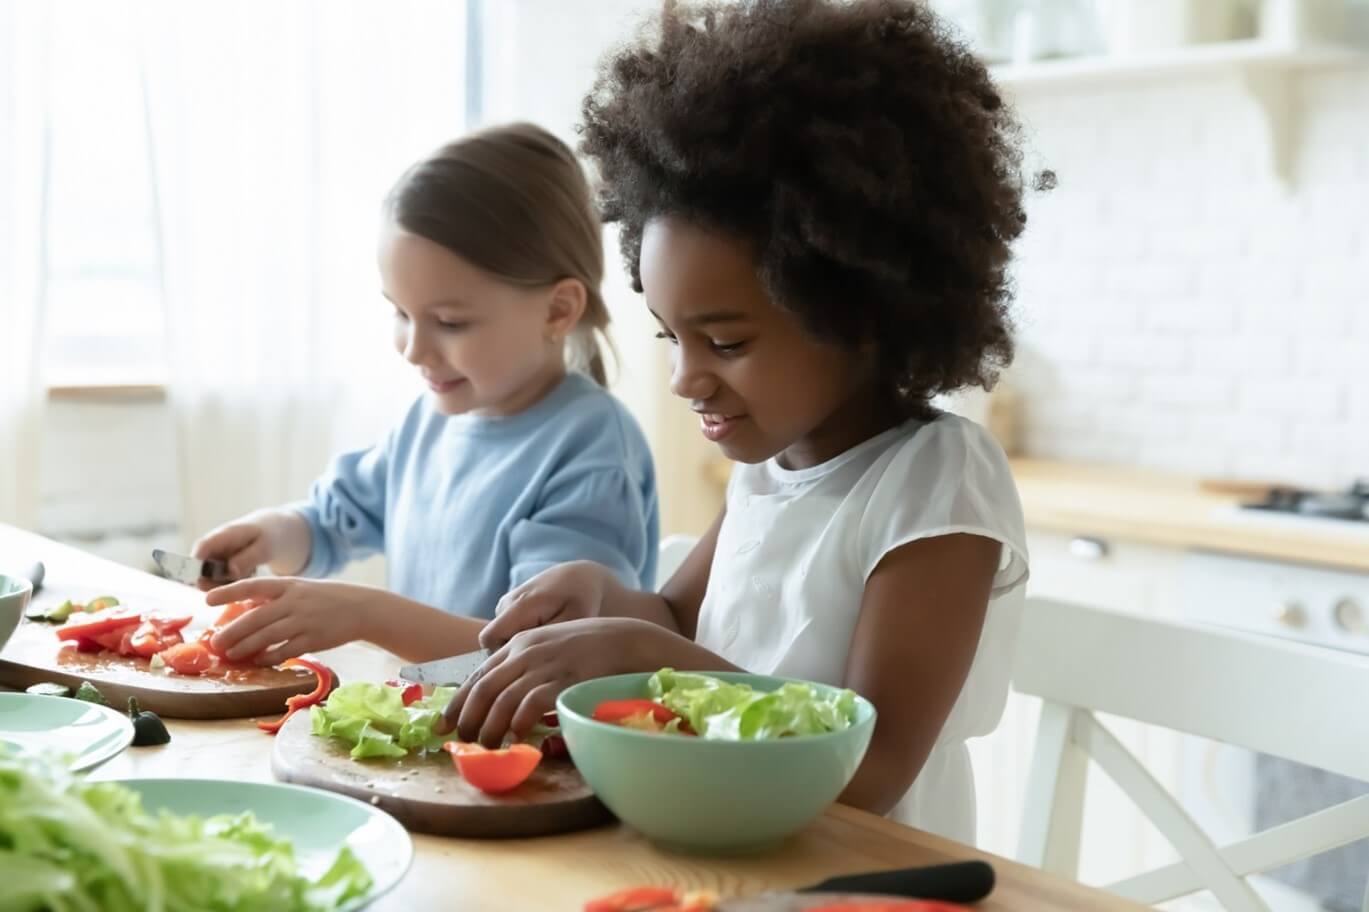 How Online Games Can Influence What Kids Eat